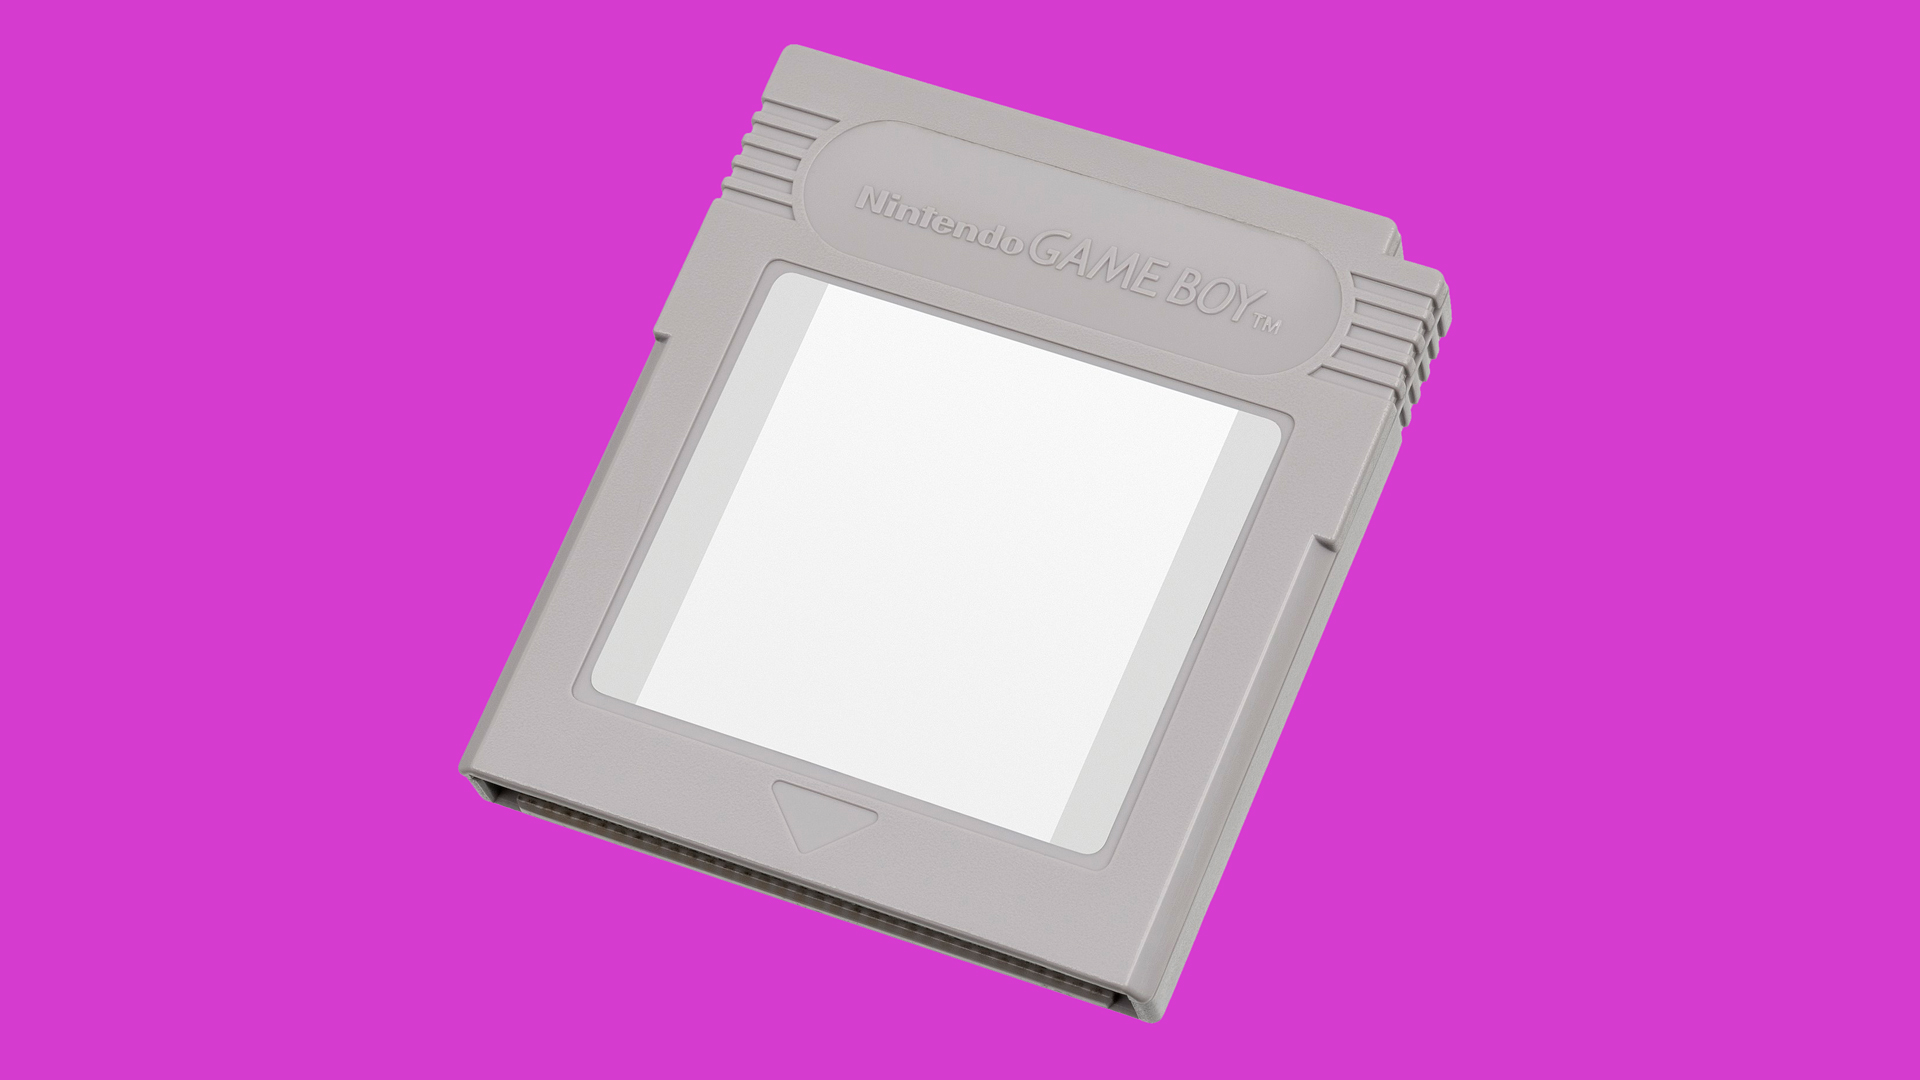 image of a Game Boy cartridge from the '90s